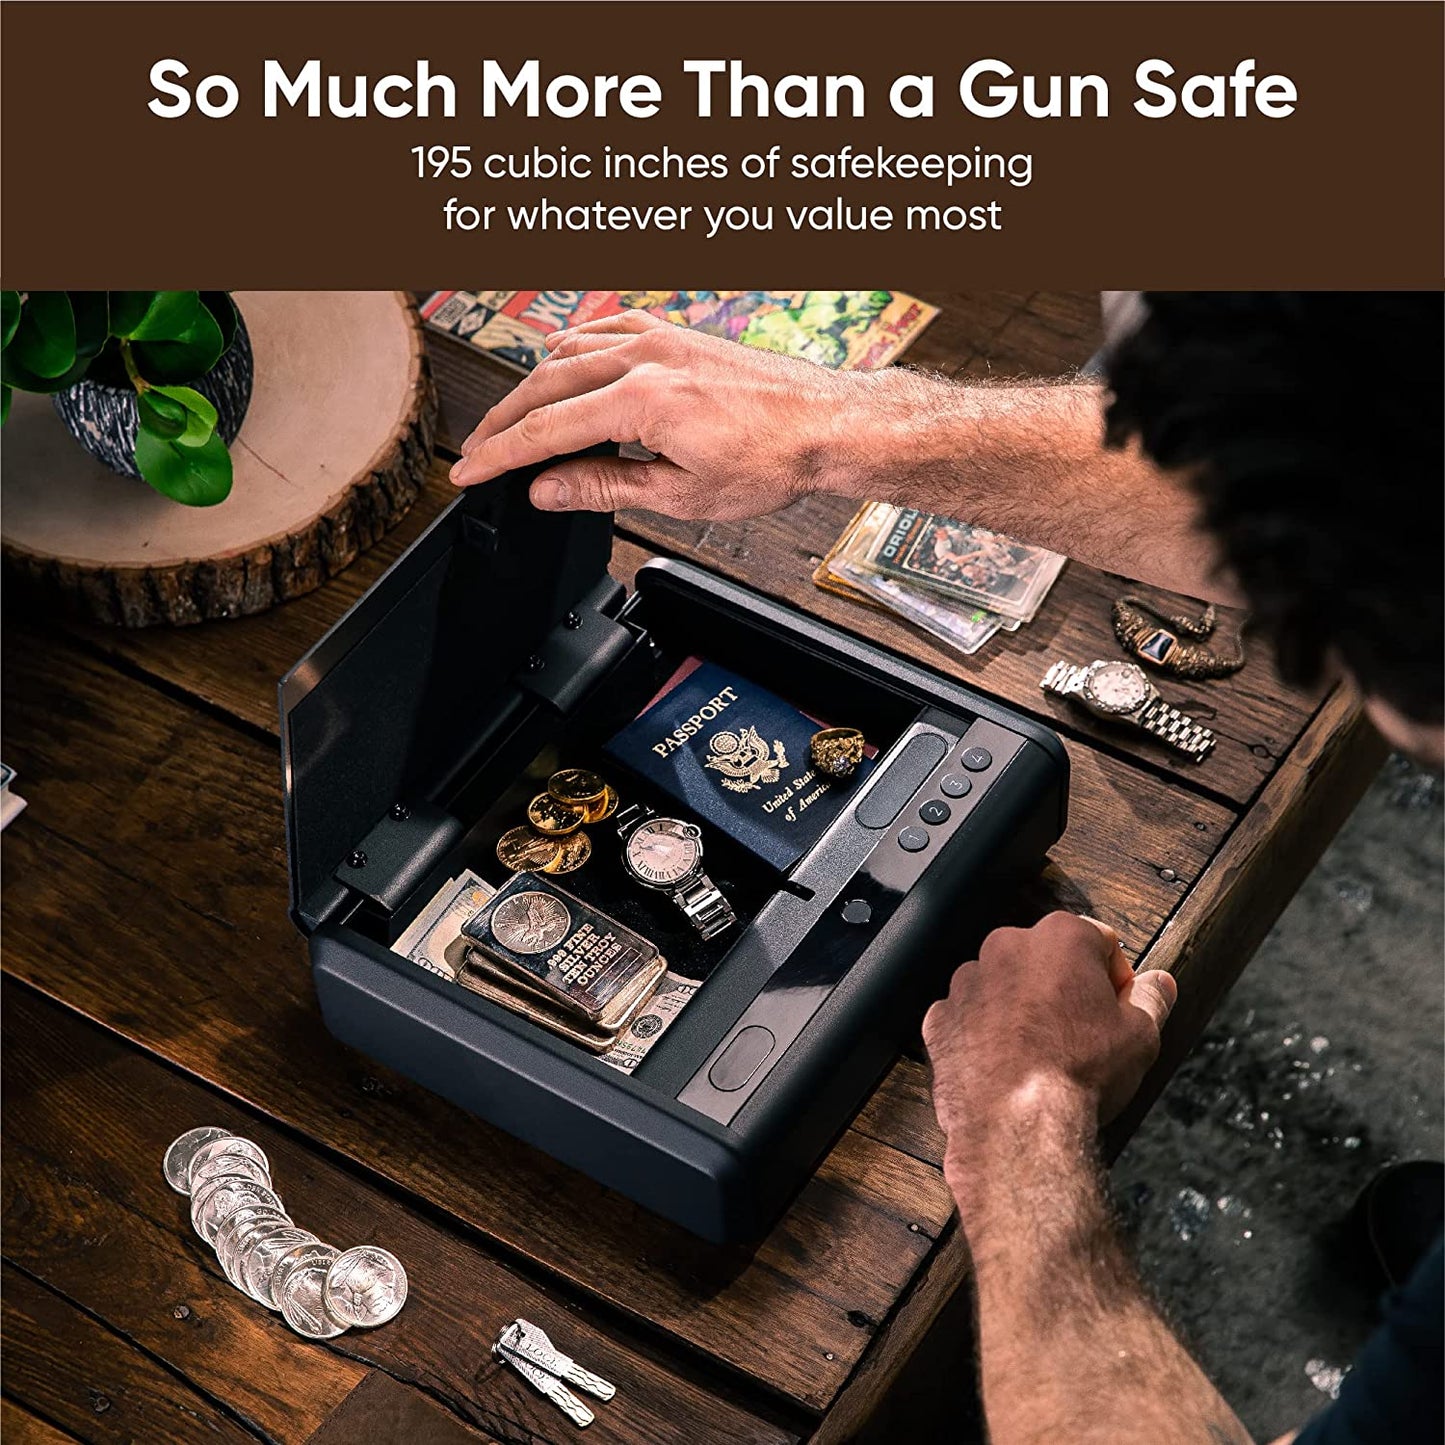 WYZE Gun Safe with Instant Fingerprint, Backlit Keypad, App Unlock, Physical Key. Smart Features with Simple Secure App, Track Usage , Interior LED,12-months Monitor Battery Life, 195 Cubic , Black